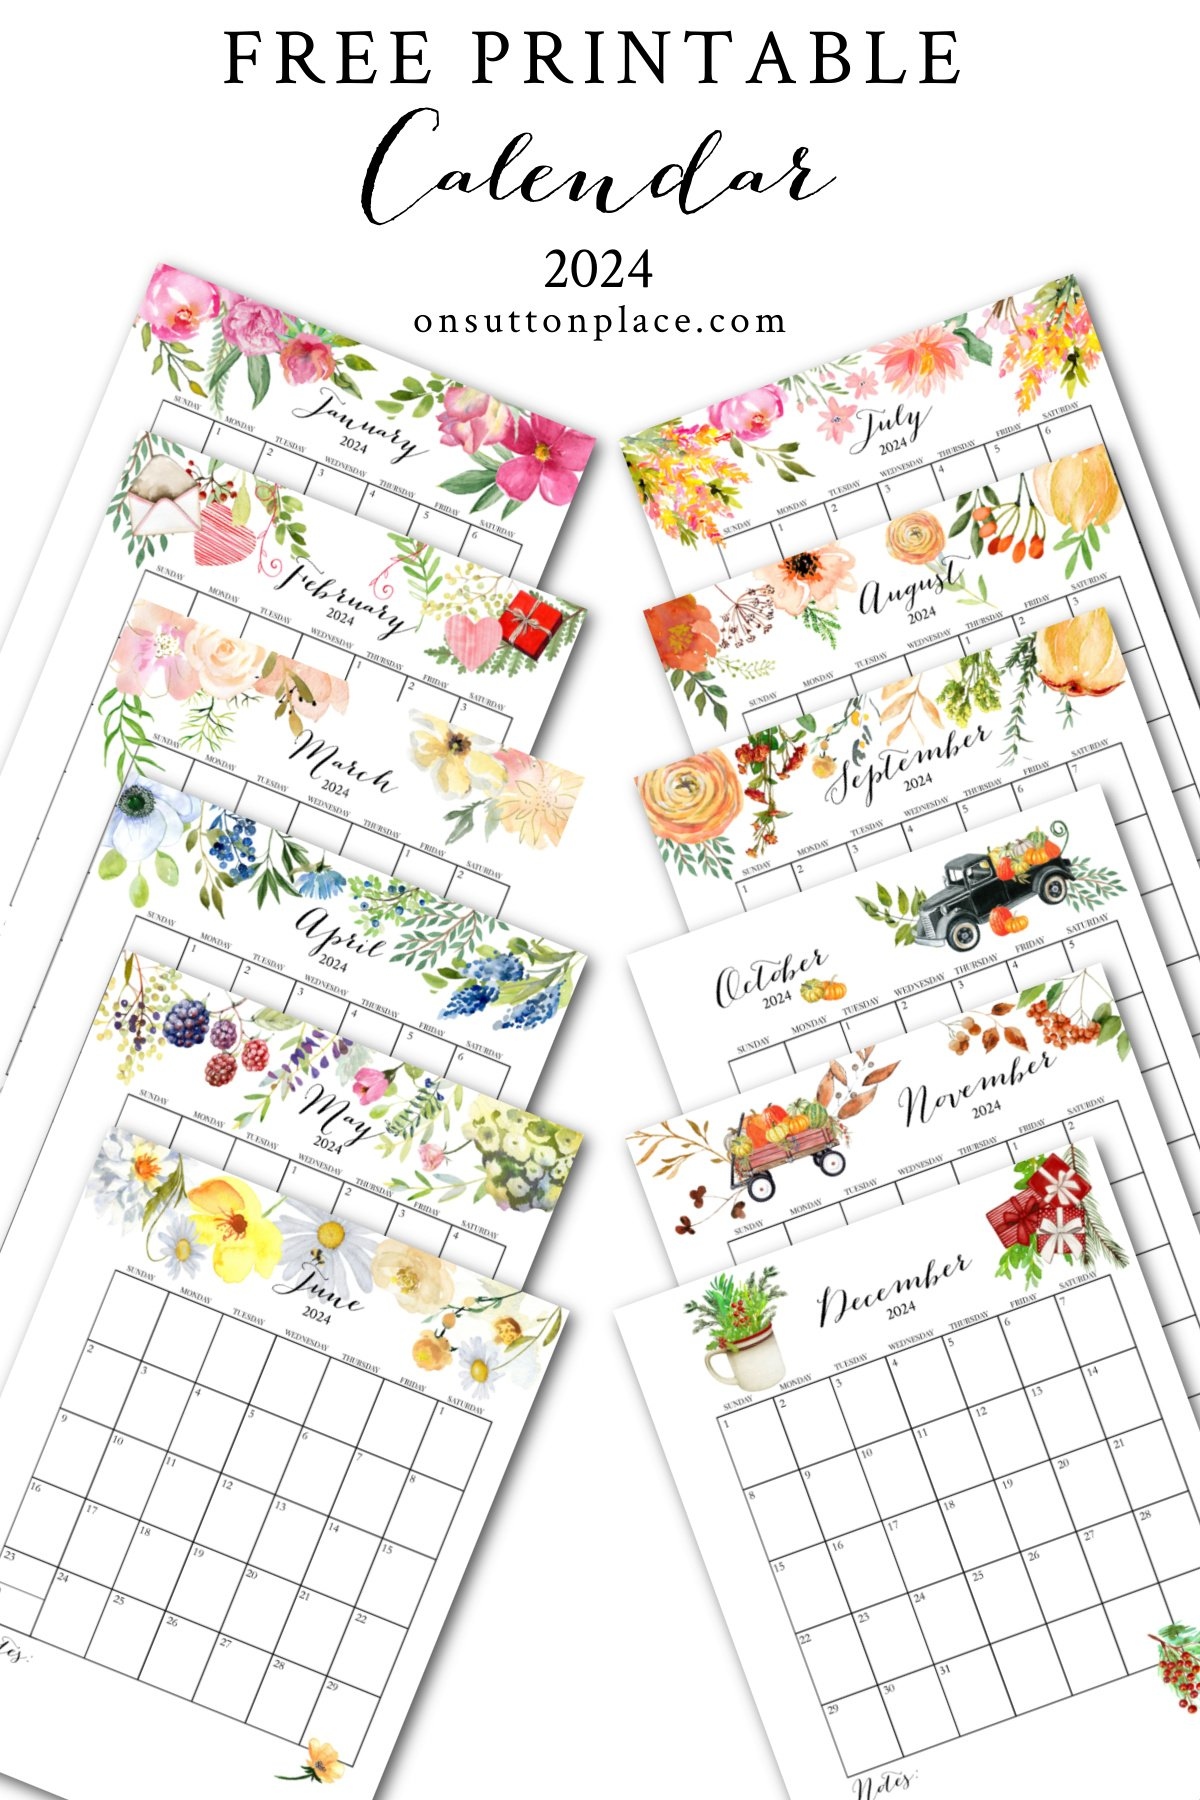 2024 Free Printable Calendar With Planner Pages - On Sutton Place with Free Printable Calendar 2024 With Scripture